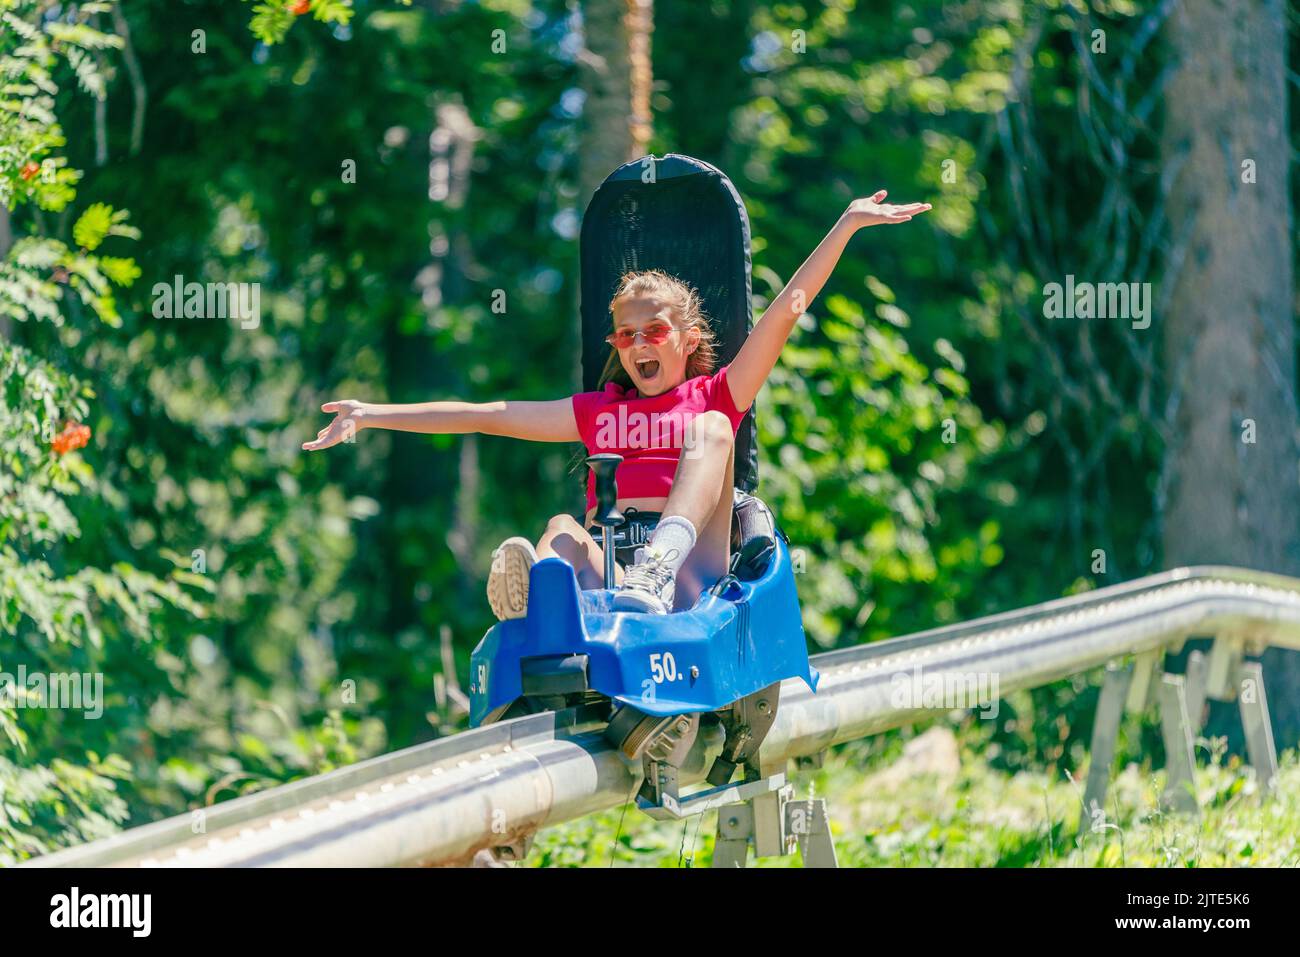 Screaming girl riding mountain roller coaster with outstretched arms. Forest in background Stock Photo